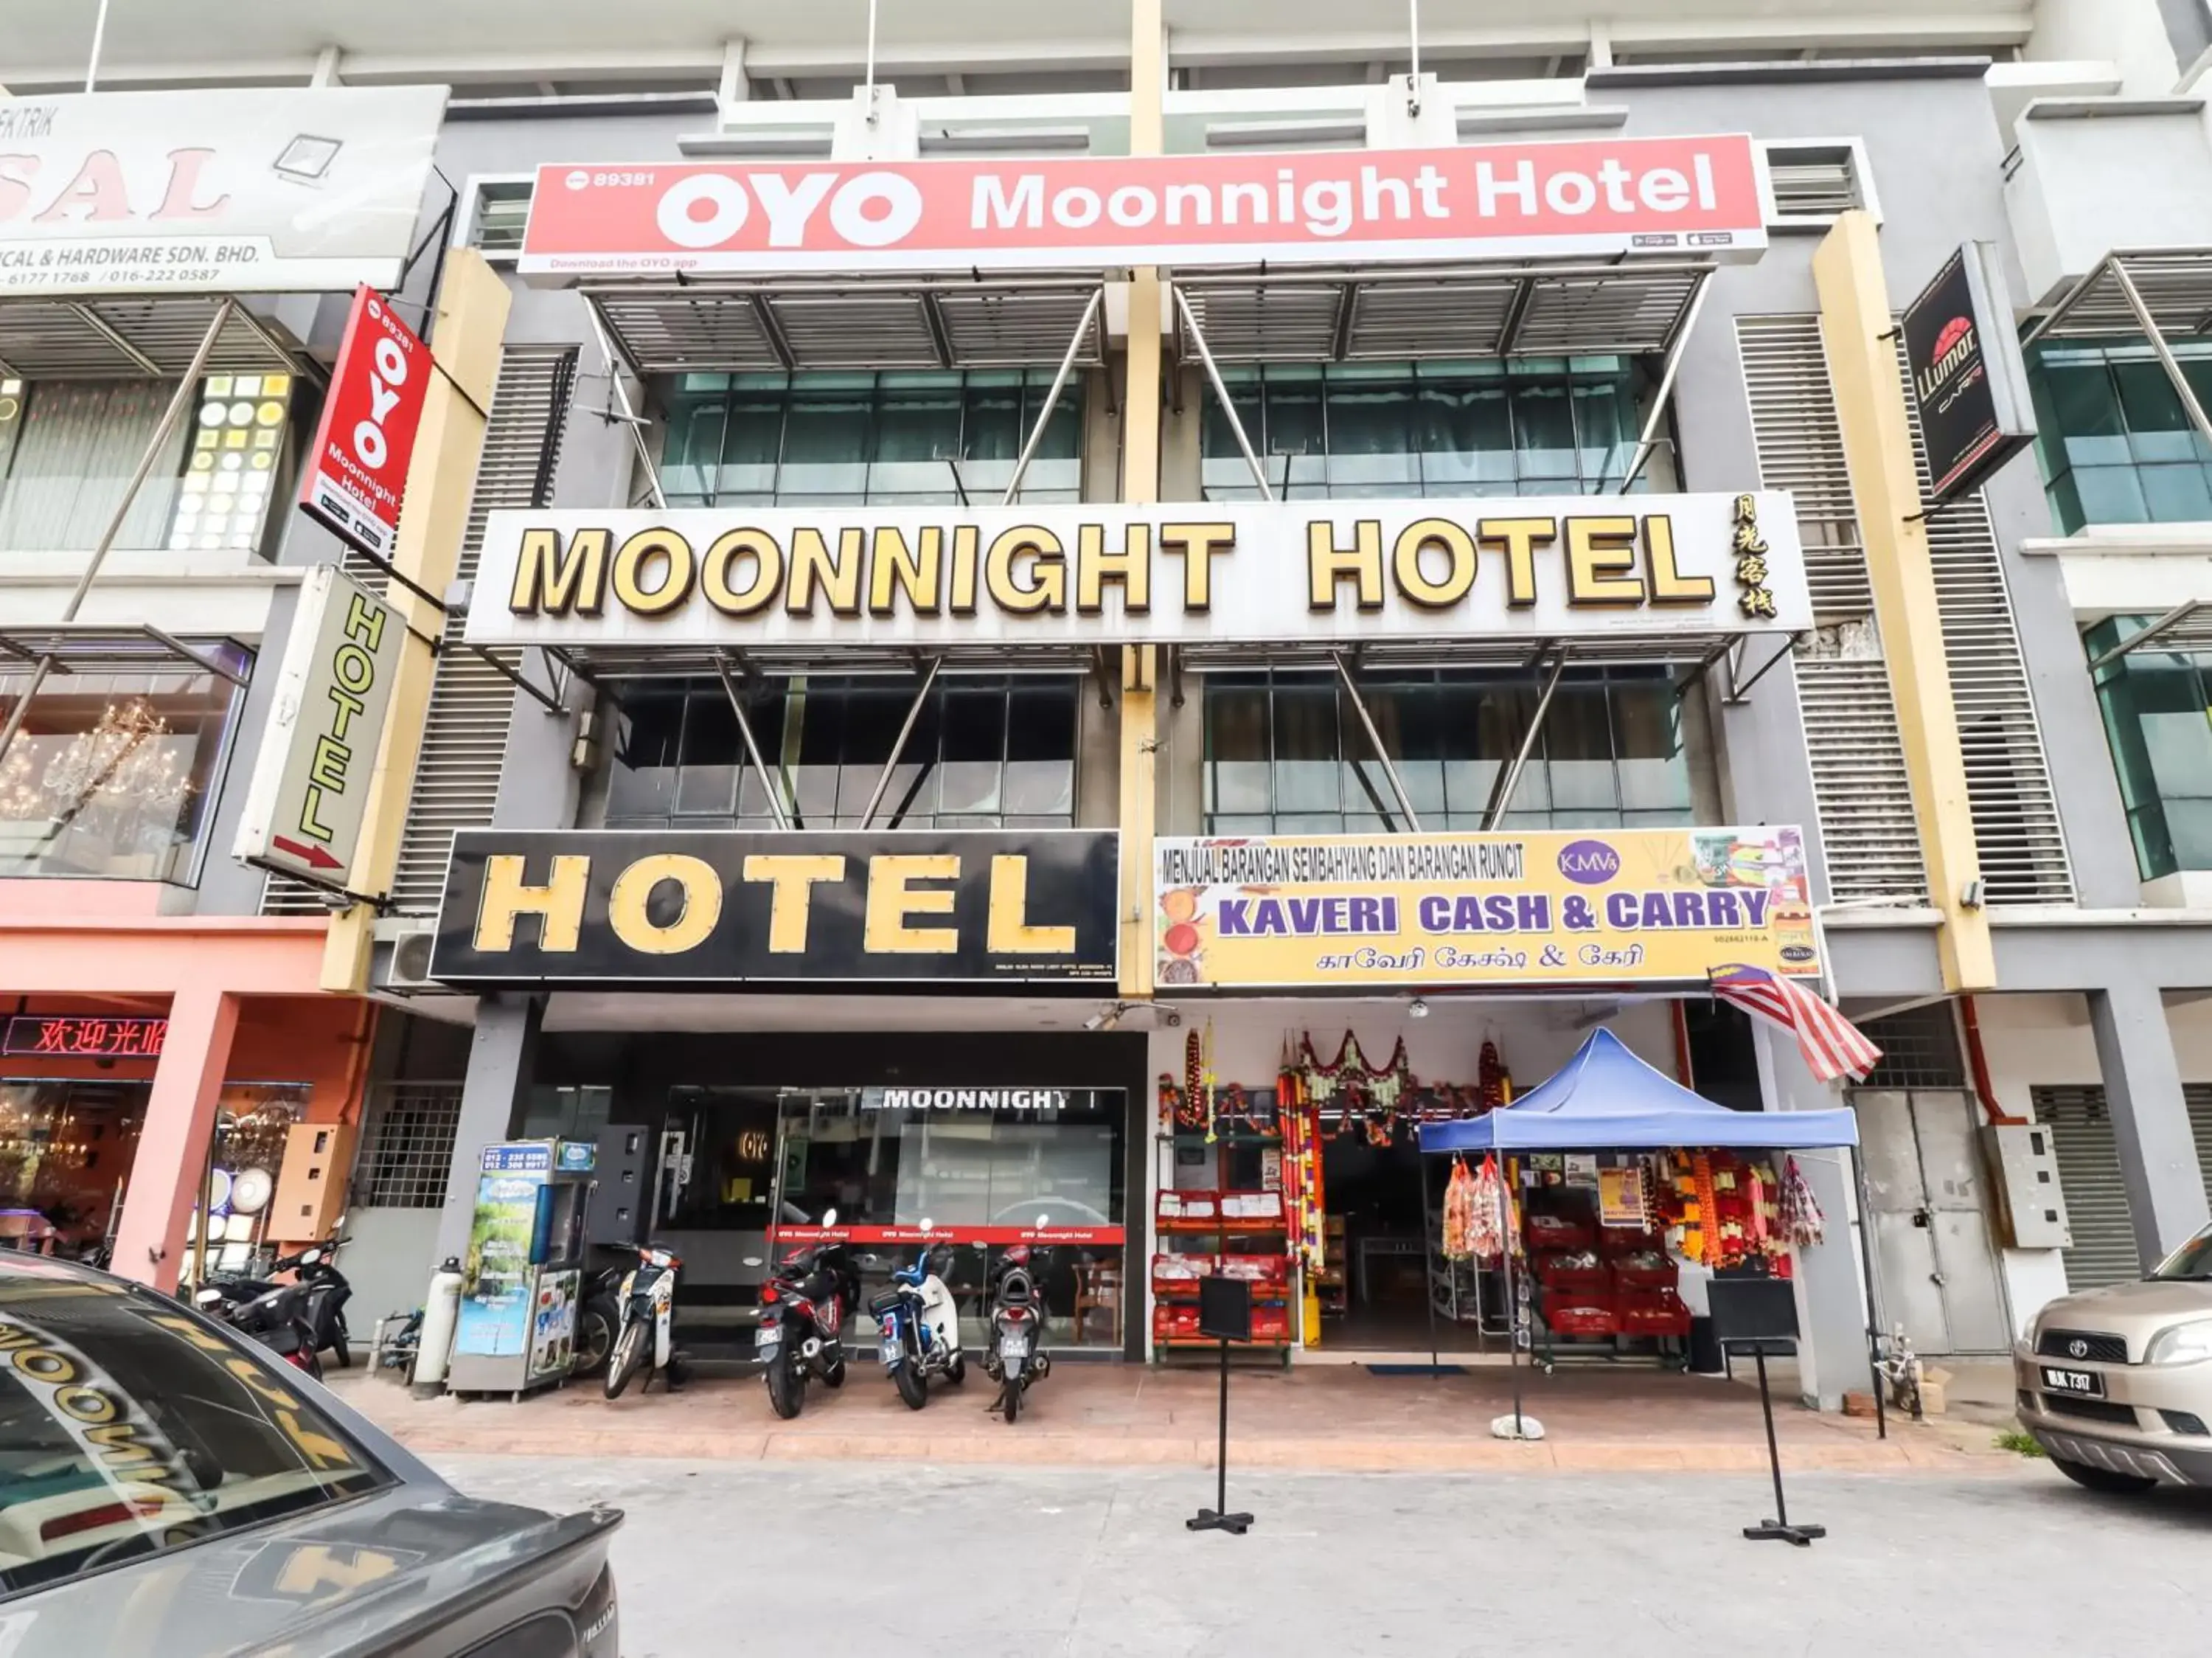 Property Building in OYO 89381 Moonnight Hotel